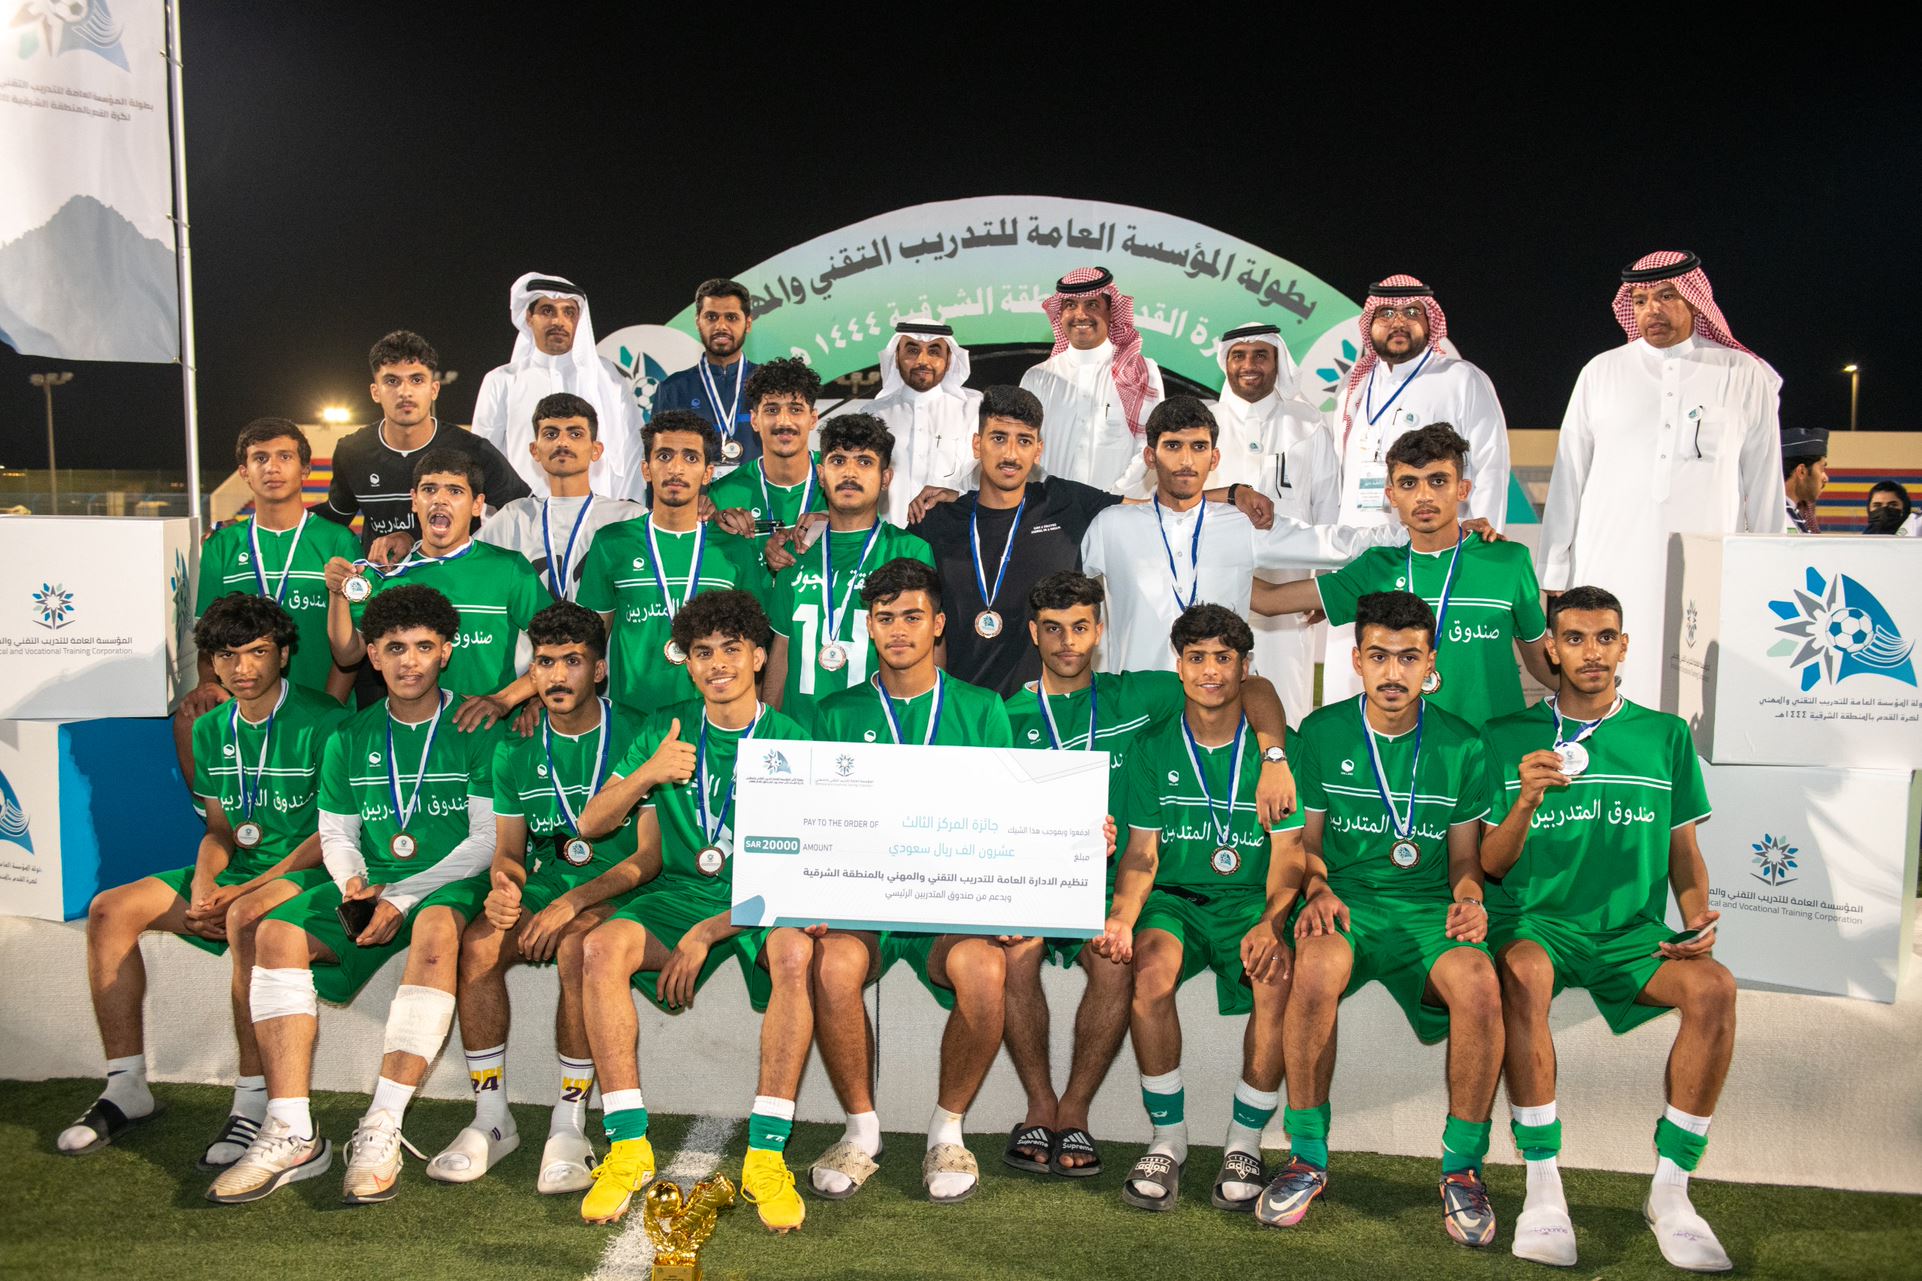 TVTC Governor Crowns Winners at Conclusion of TVTC Cup Championship for 2023